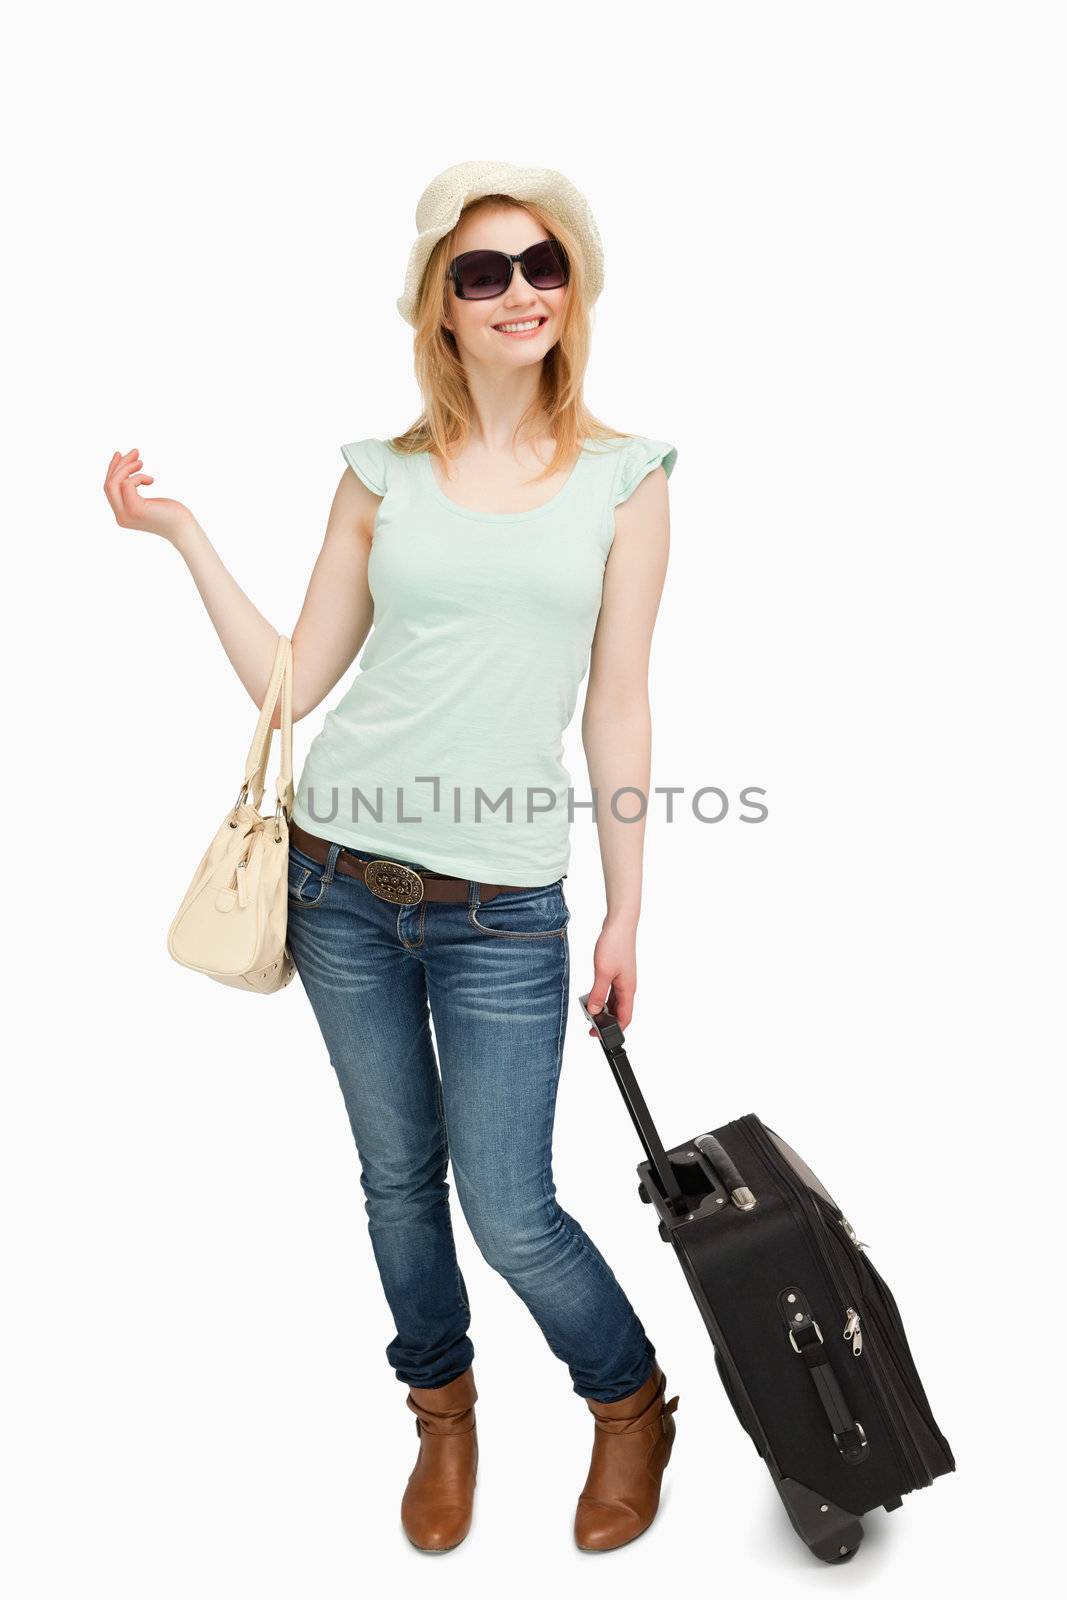 Woman standing while holding baggages against white background